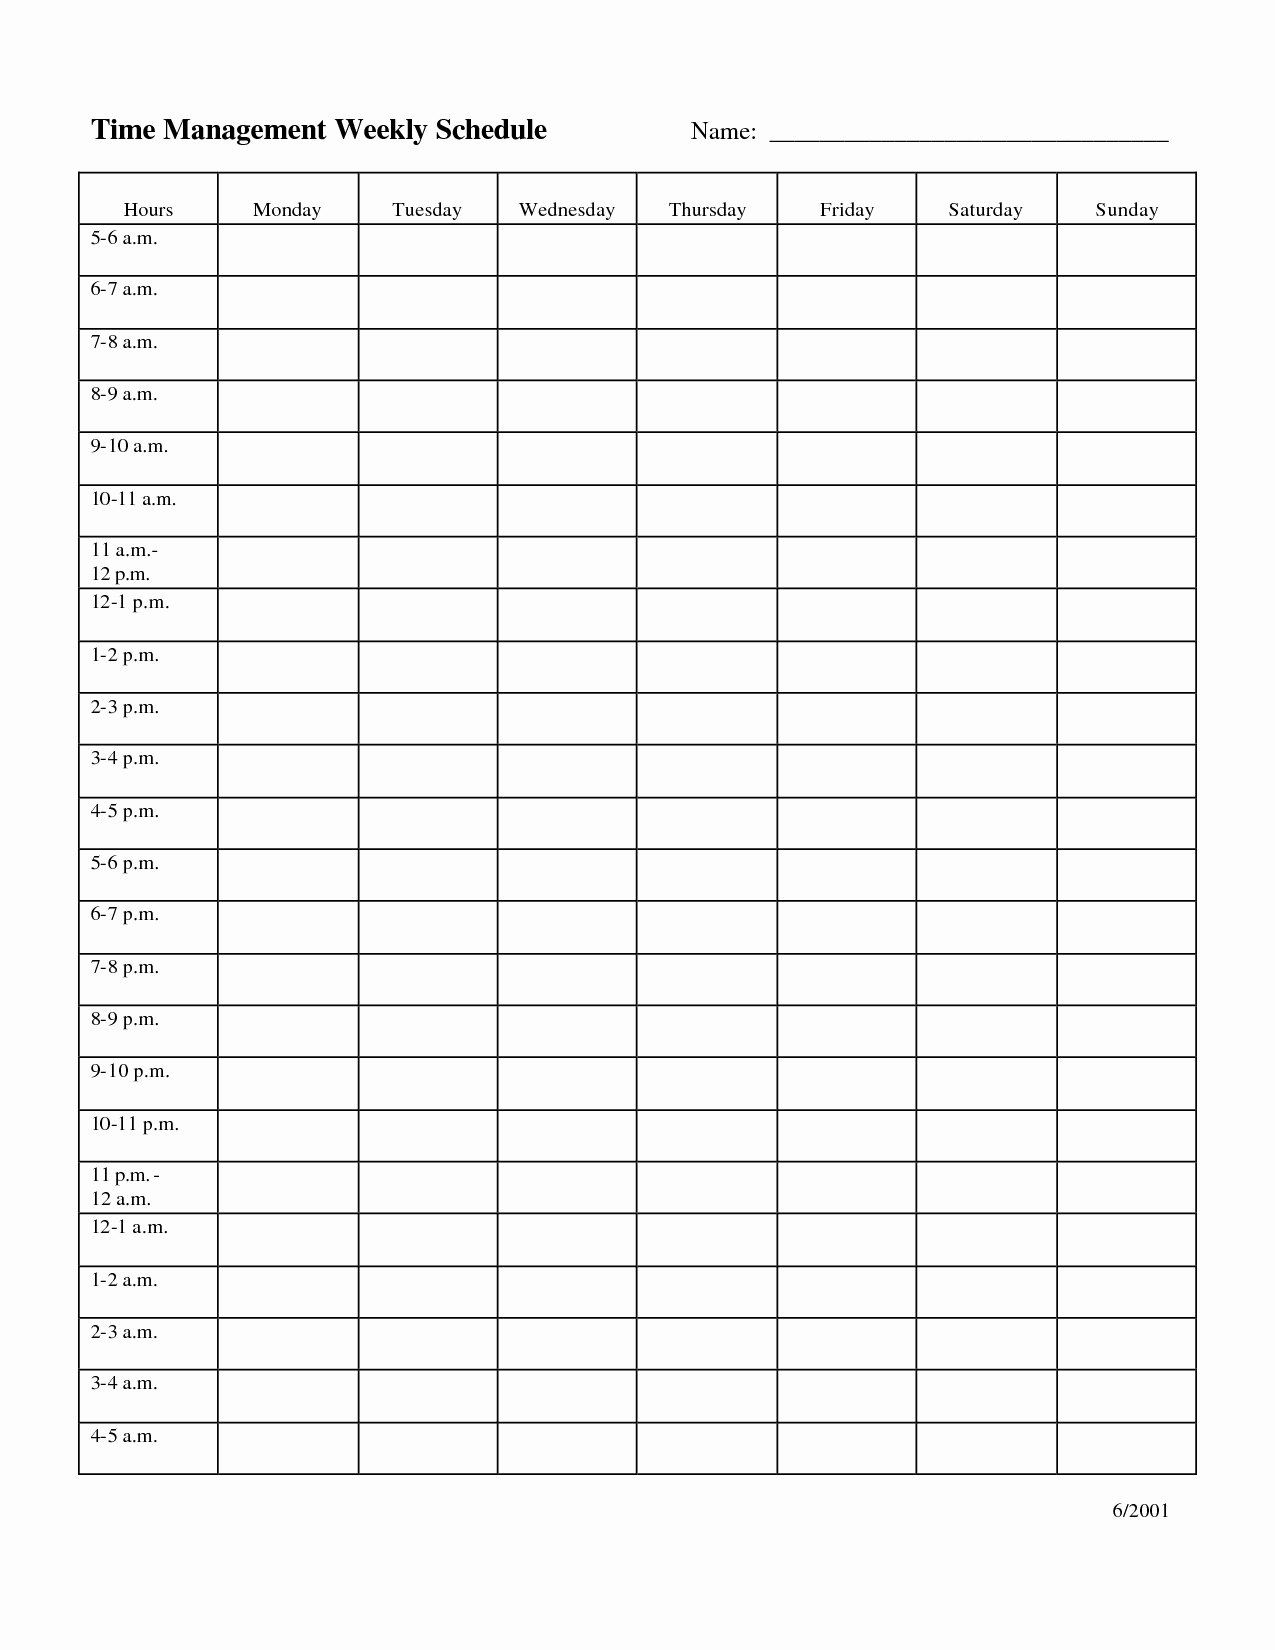 Weekly Schedule Template Printable Awesome Time Management Weekly Schedule Template …